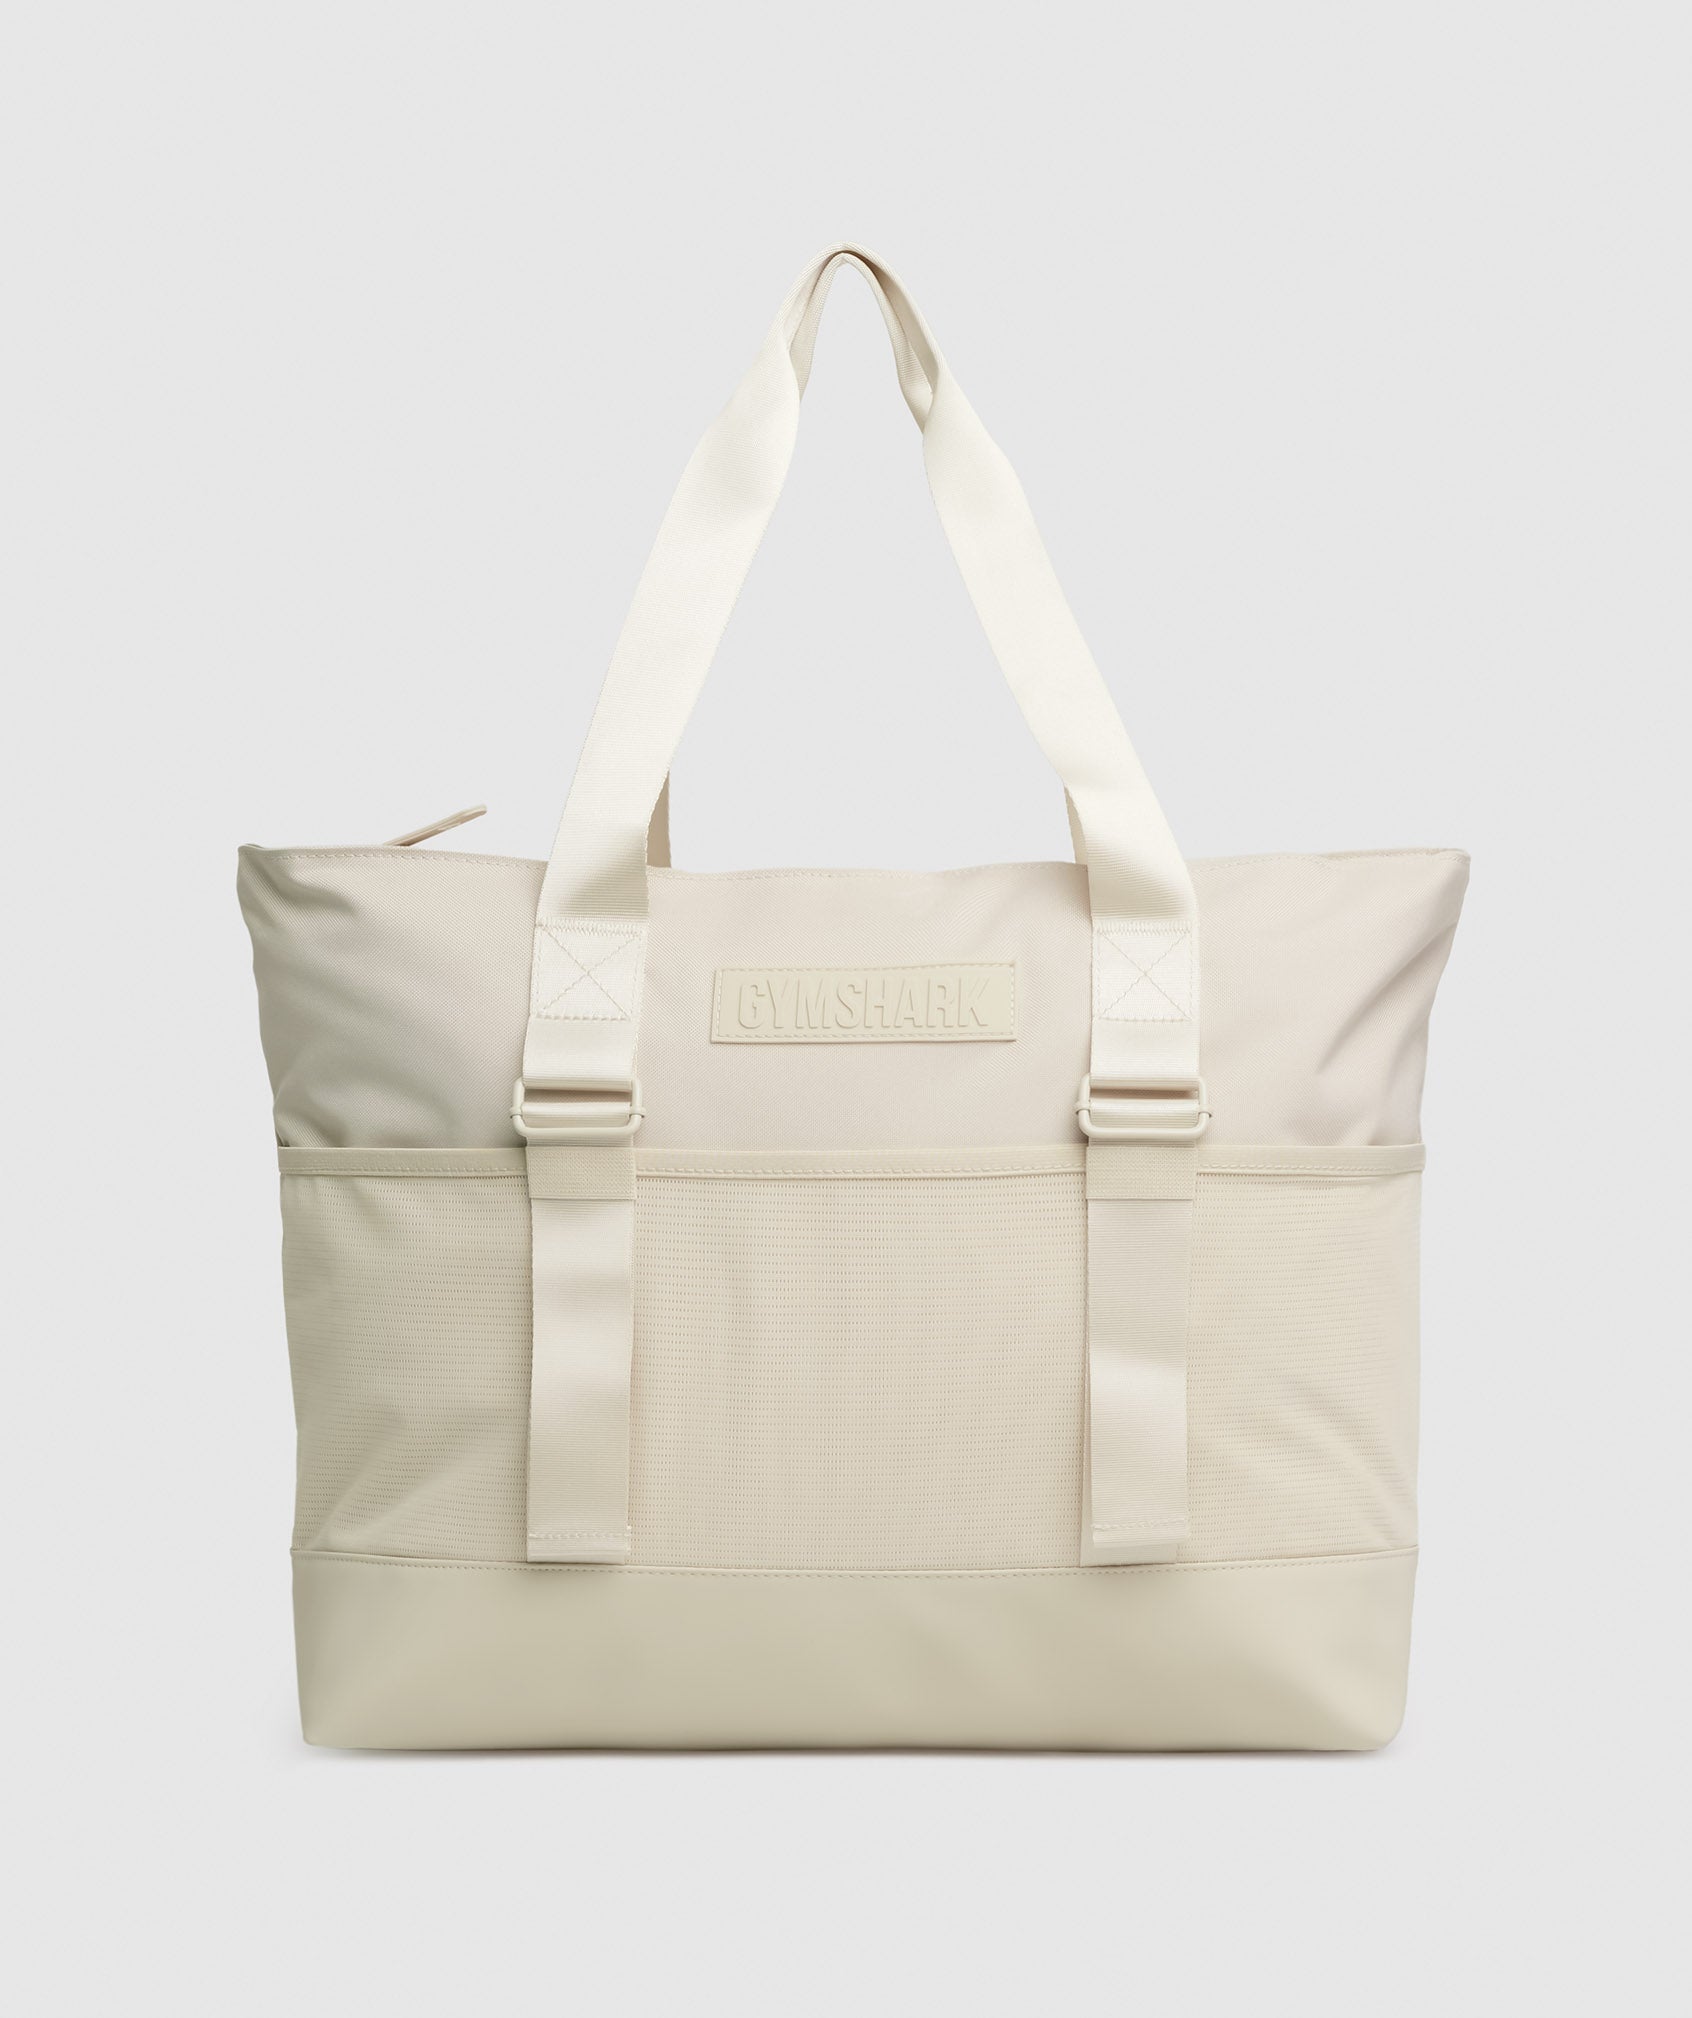 Everyday Tote in Pebble Grey